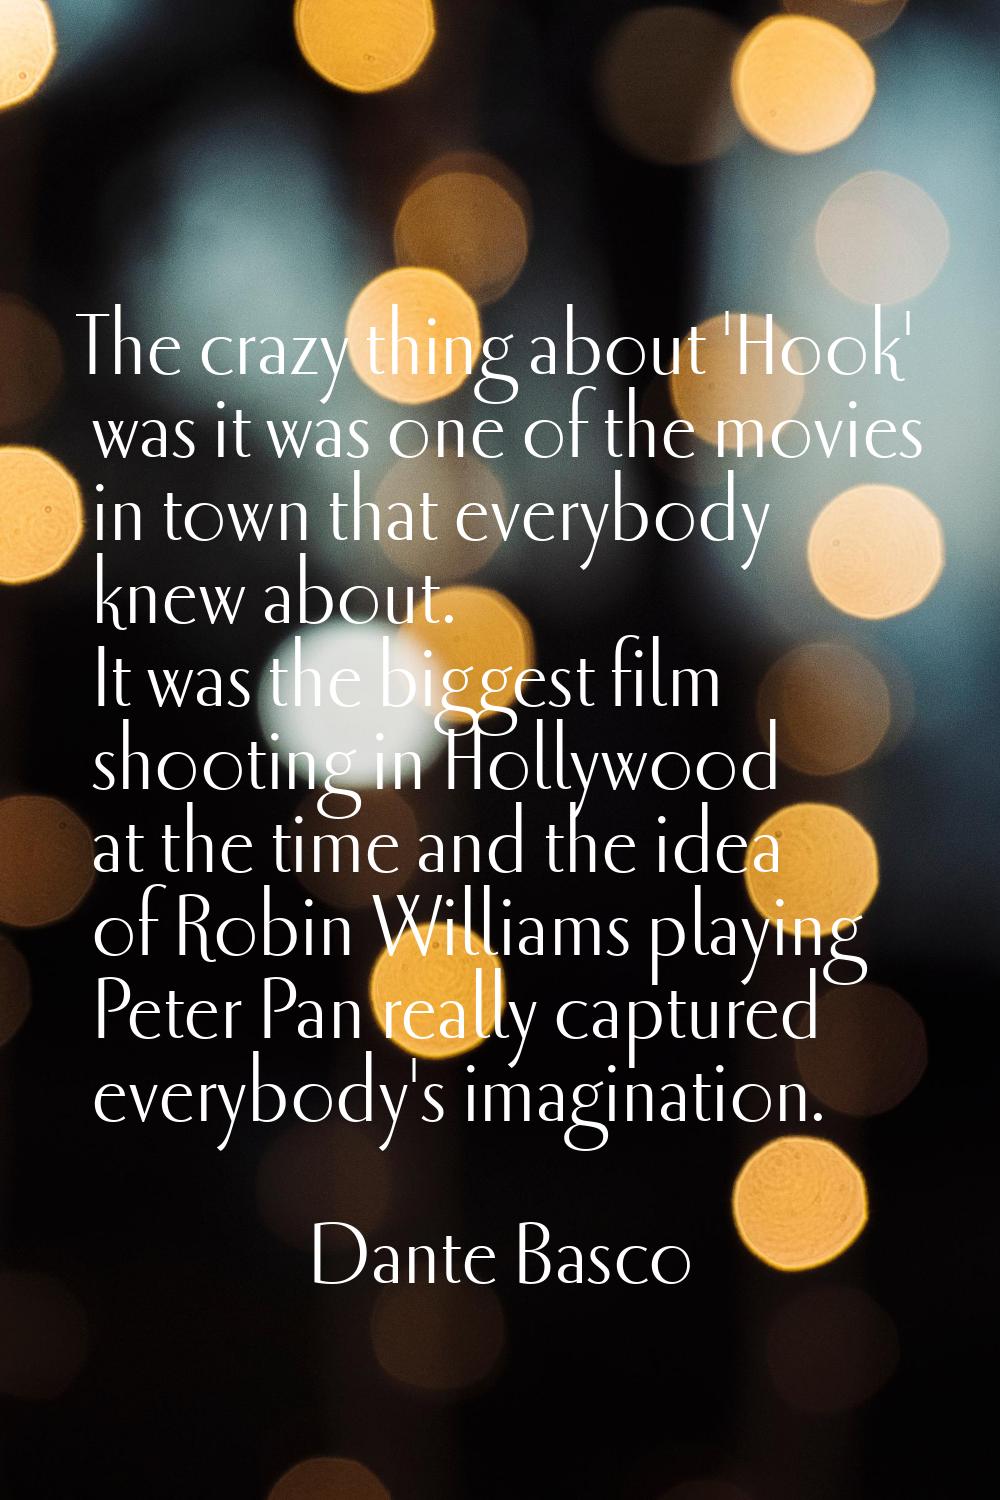 The crazy thing about 'Hook' was it was one of the movies in town that everybody knew about. It was